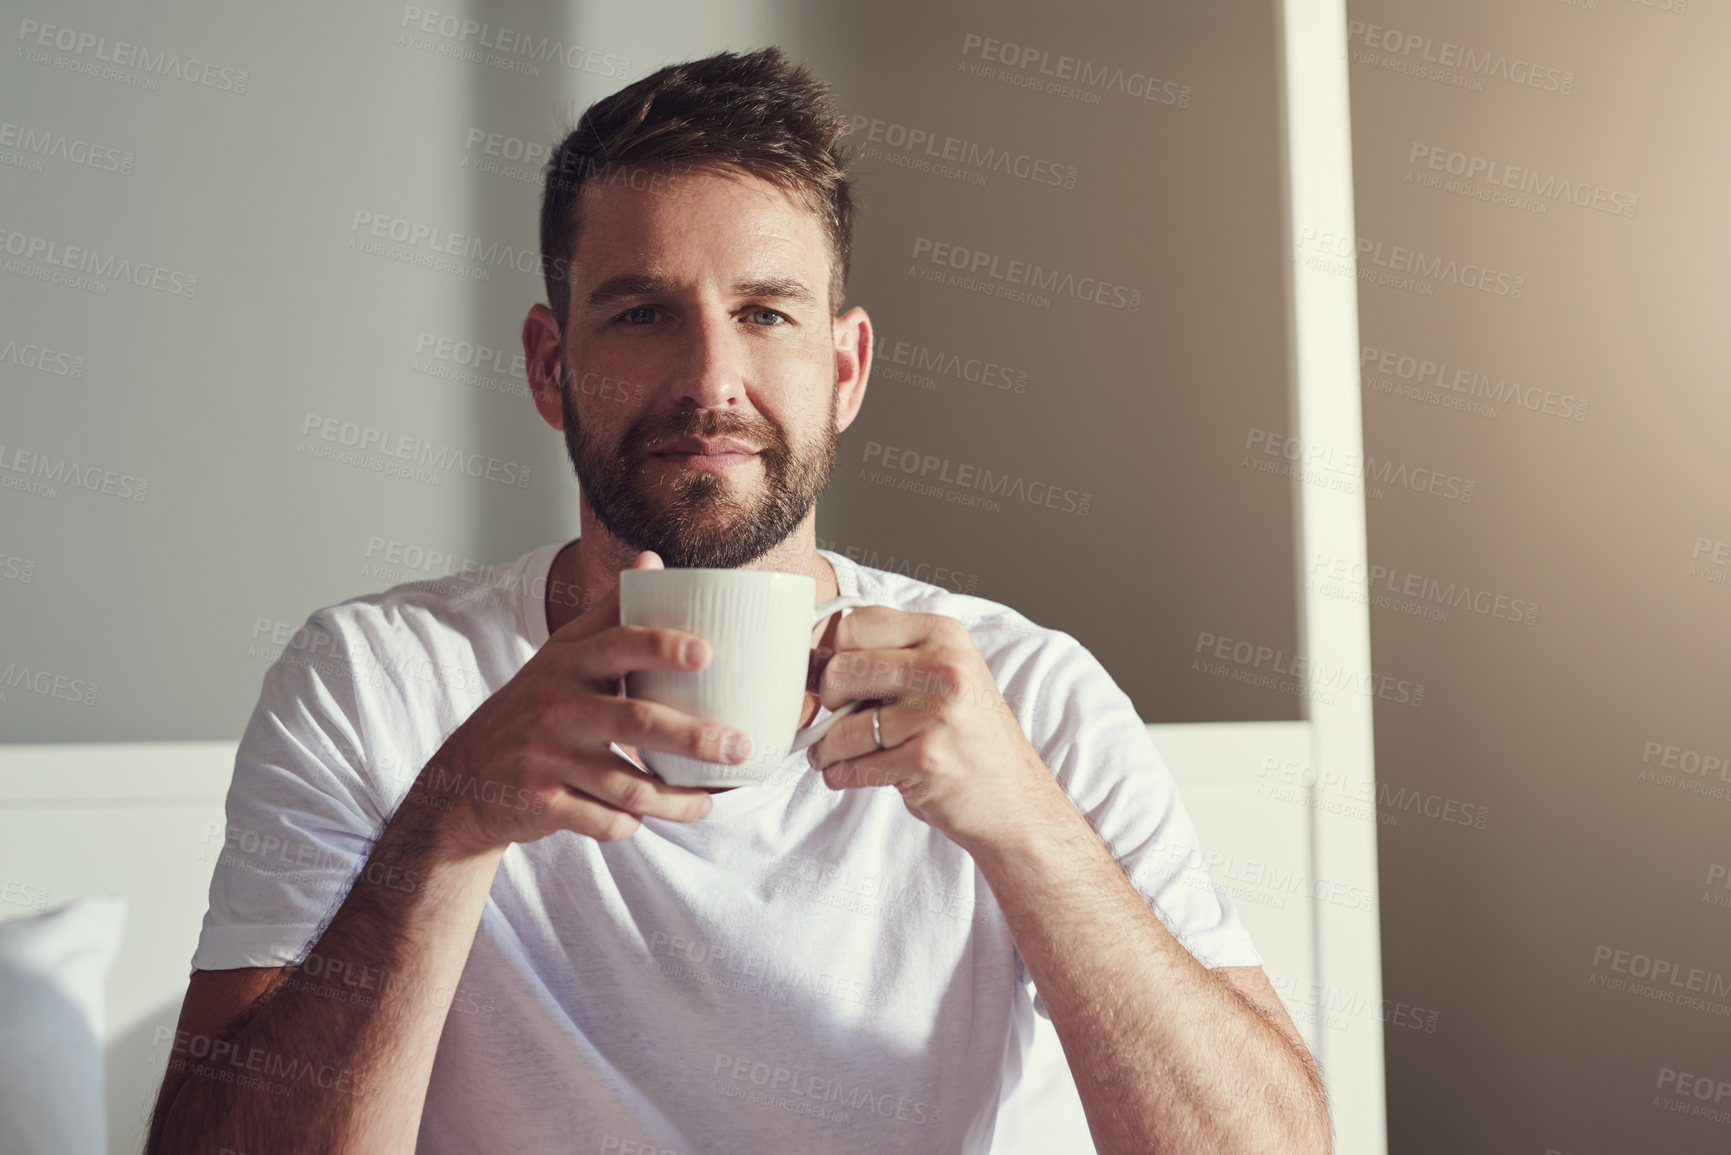 Buy stock photo Cropped shot of a handsome  young man drinking coffee in the bedroom at home